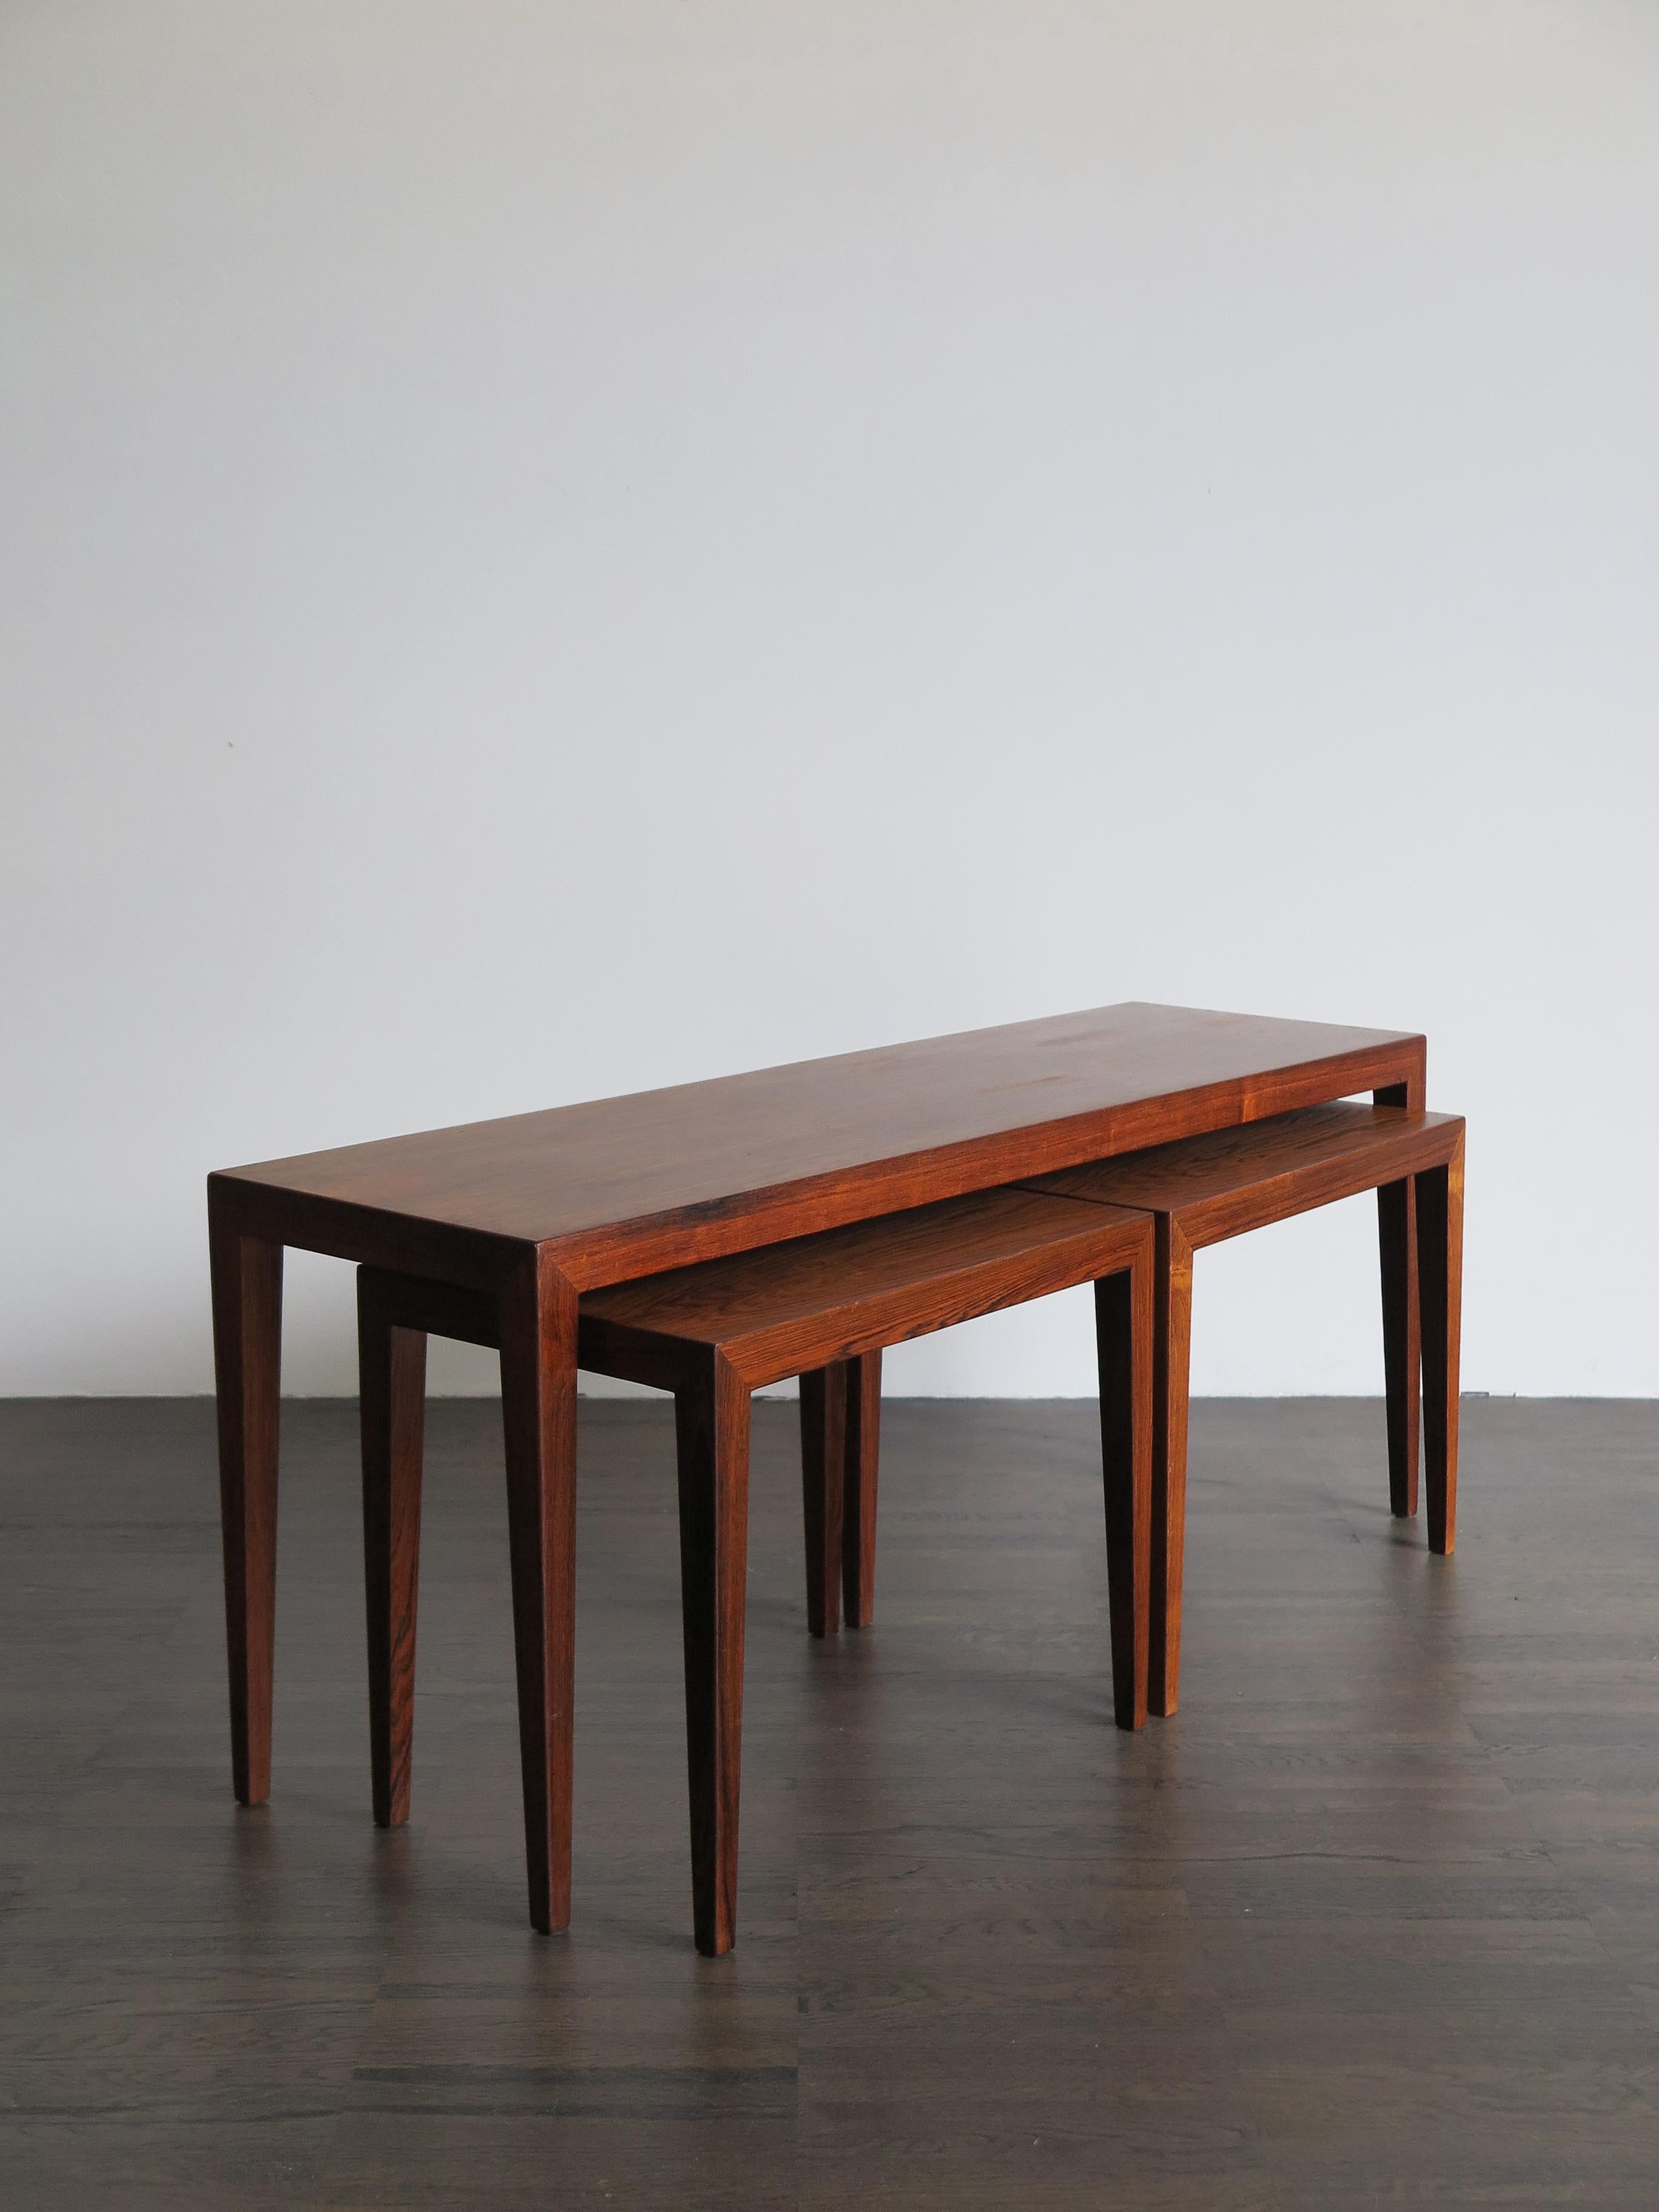 Scandinavian Mid-Century Modern design dark wood nesting tables set designed by Severin Hansen for Haslev Møbelsnedkeri with manufacturer’s adhesive label under the tops, Denmark 1960s

Please note that the items are original of the period and